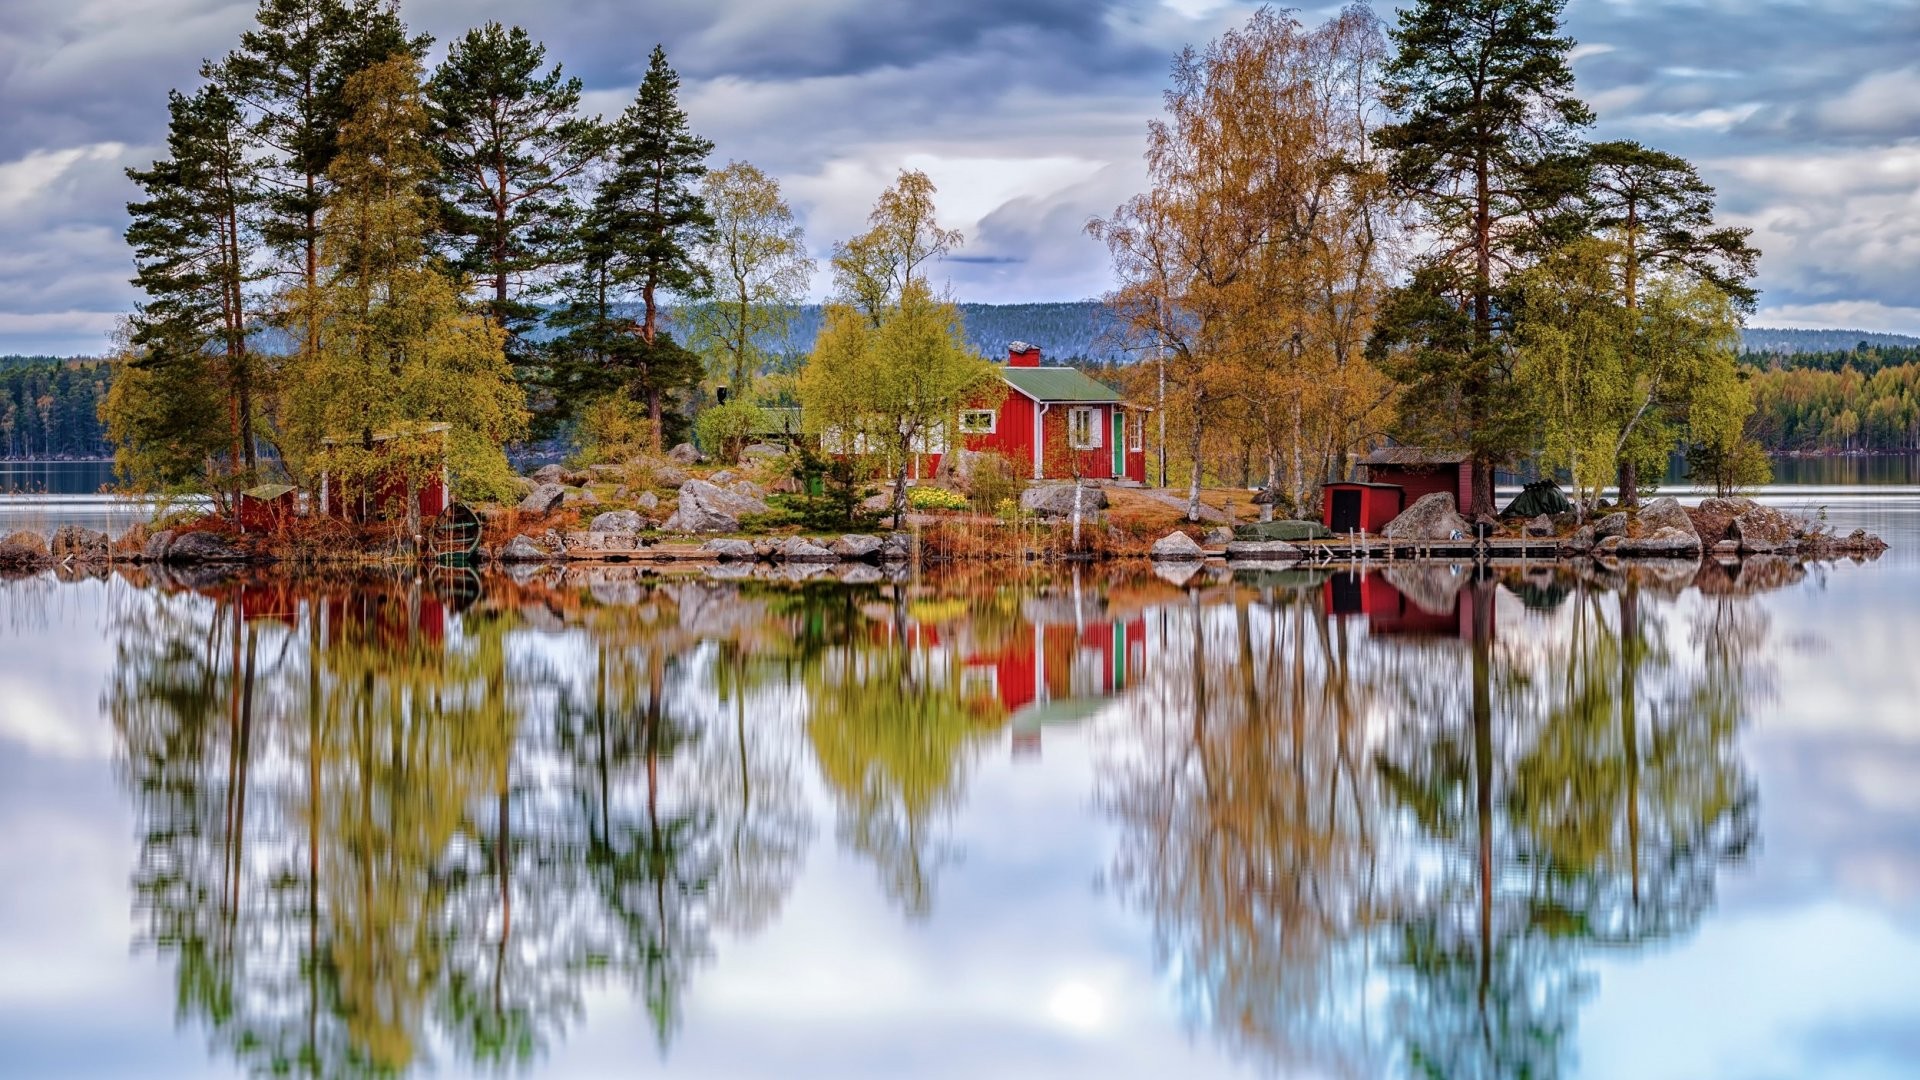 General 1920x1080 nature island landscape nordic landscapes cabin trees lake reflection water plants calm outdoors cropped